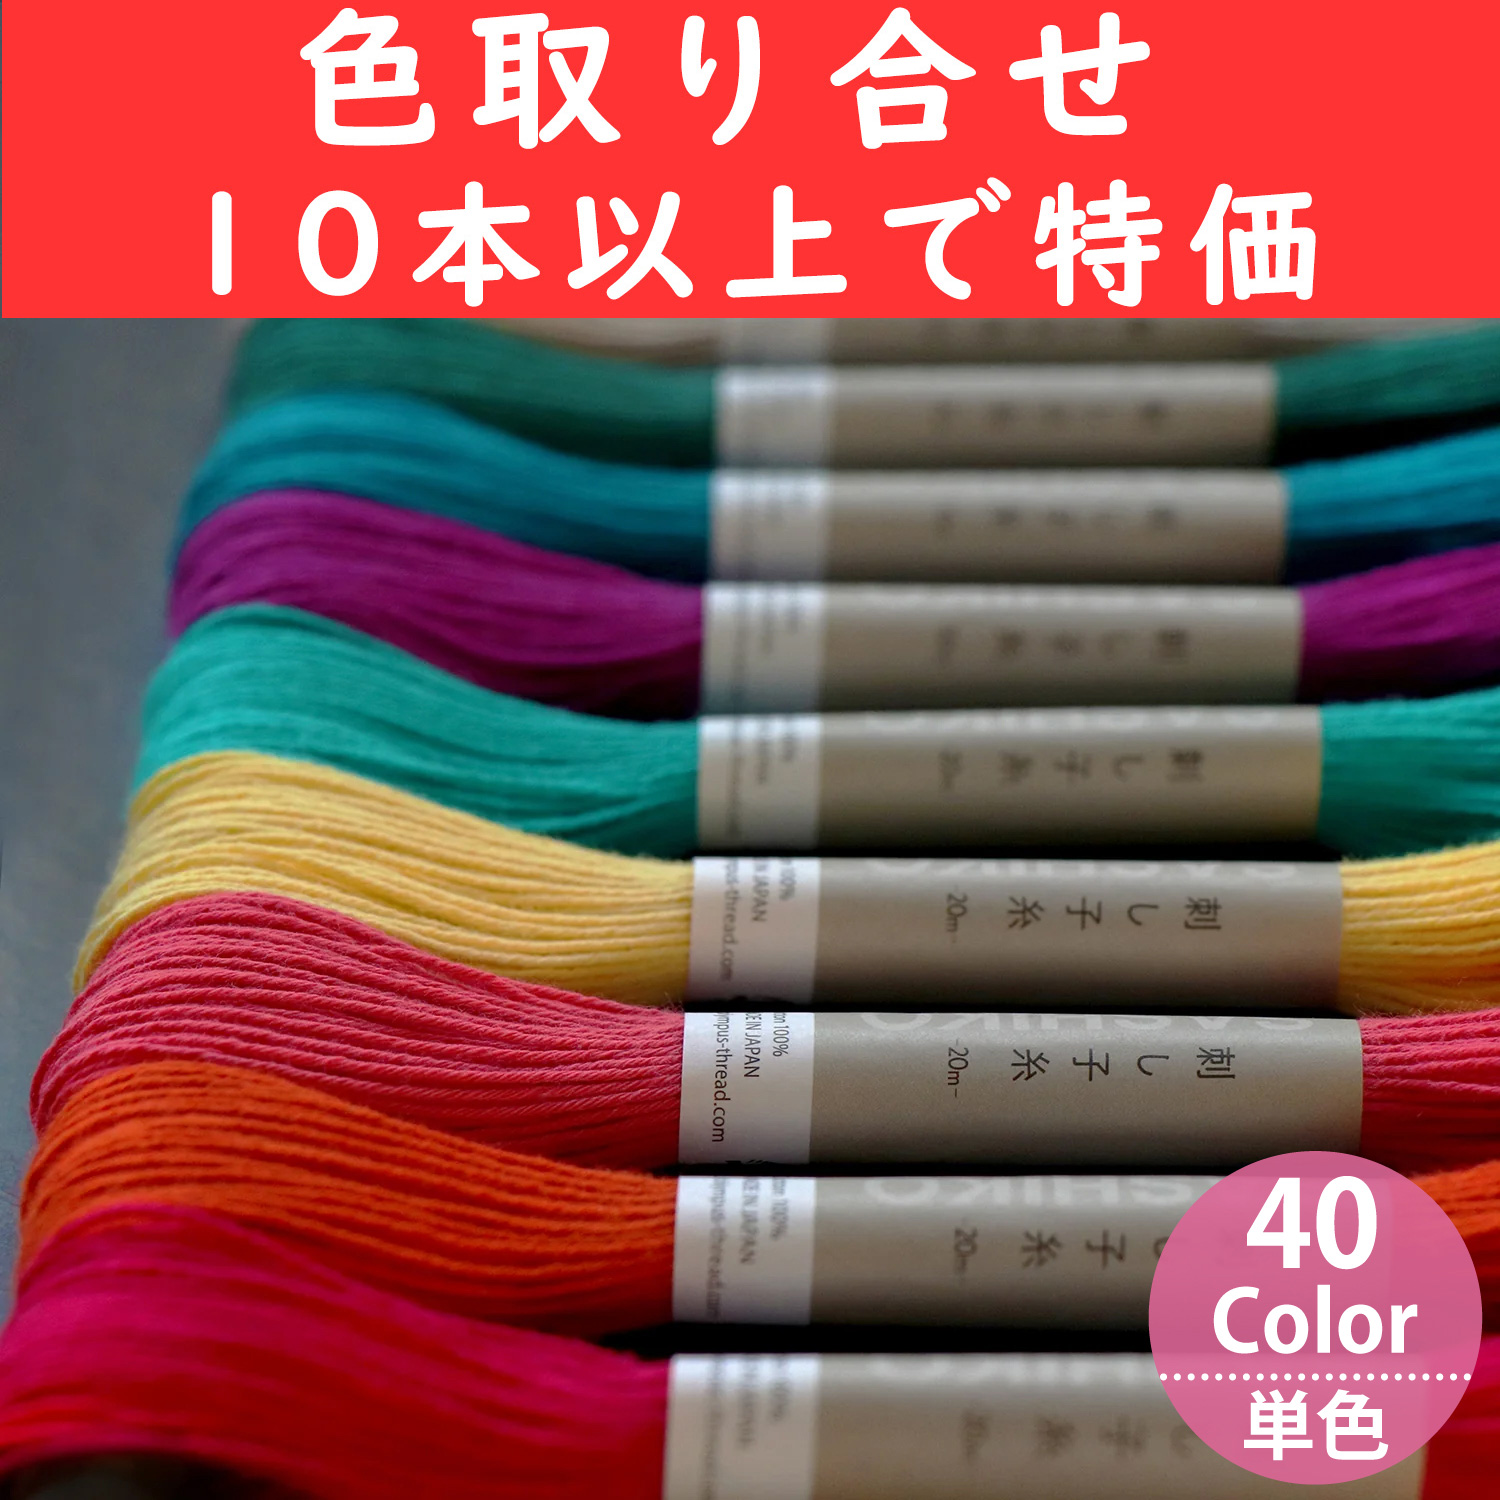 OS-20M-OVER10　Olympus SASHIKO Embroidery Thread 1color/pack 20m Skein for 10 pack or mor packs of any color (pack)